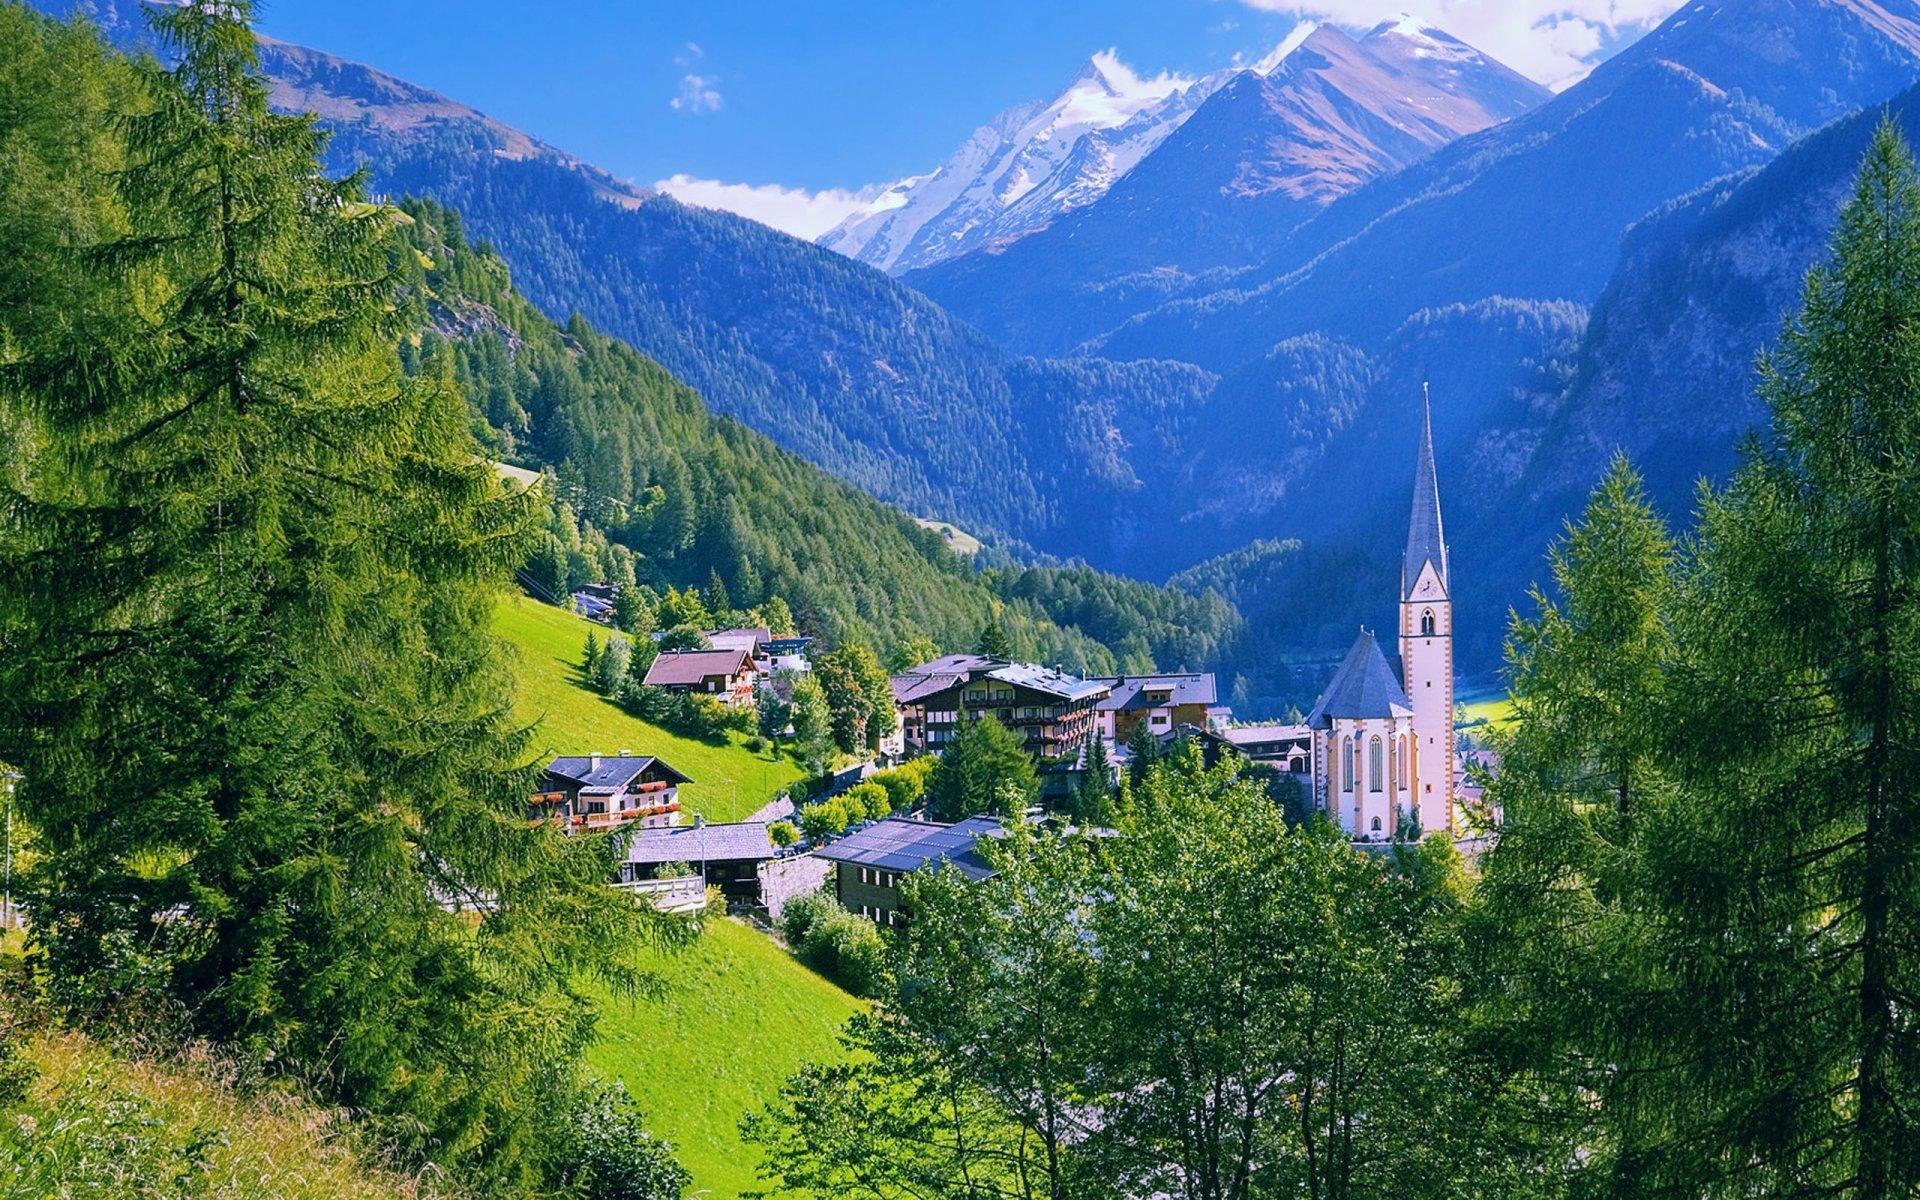 Image of the Austrian alps